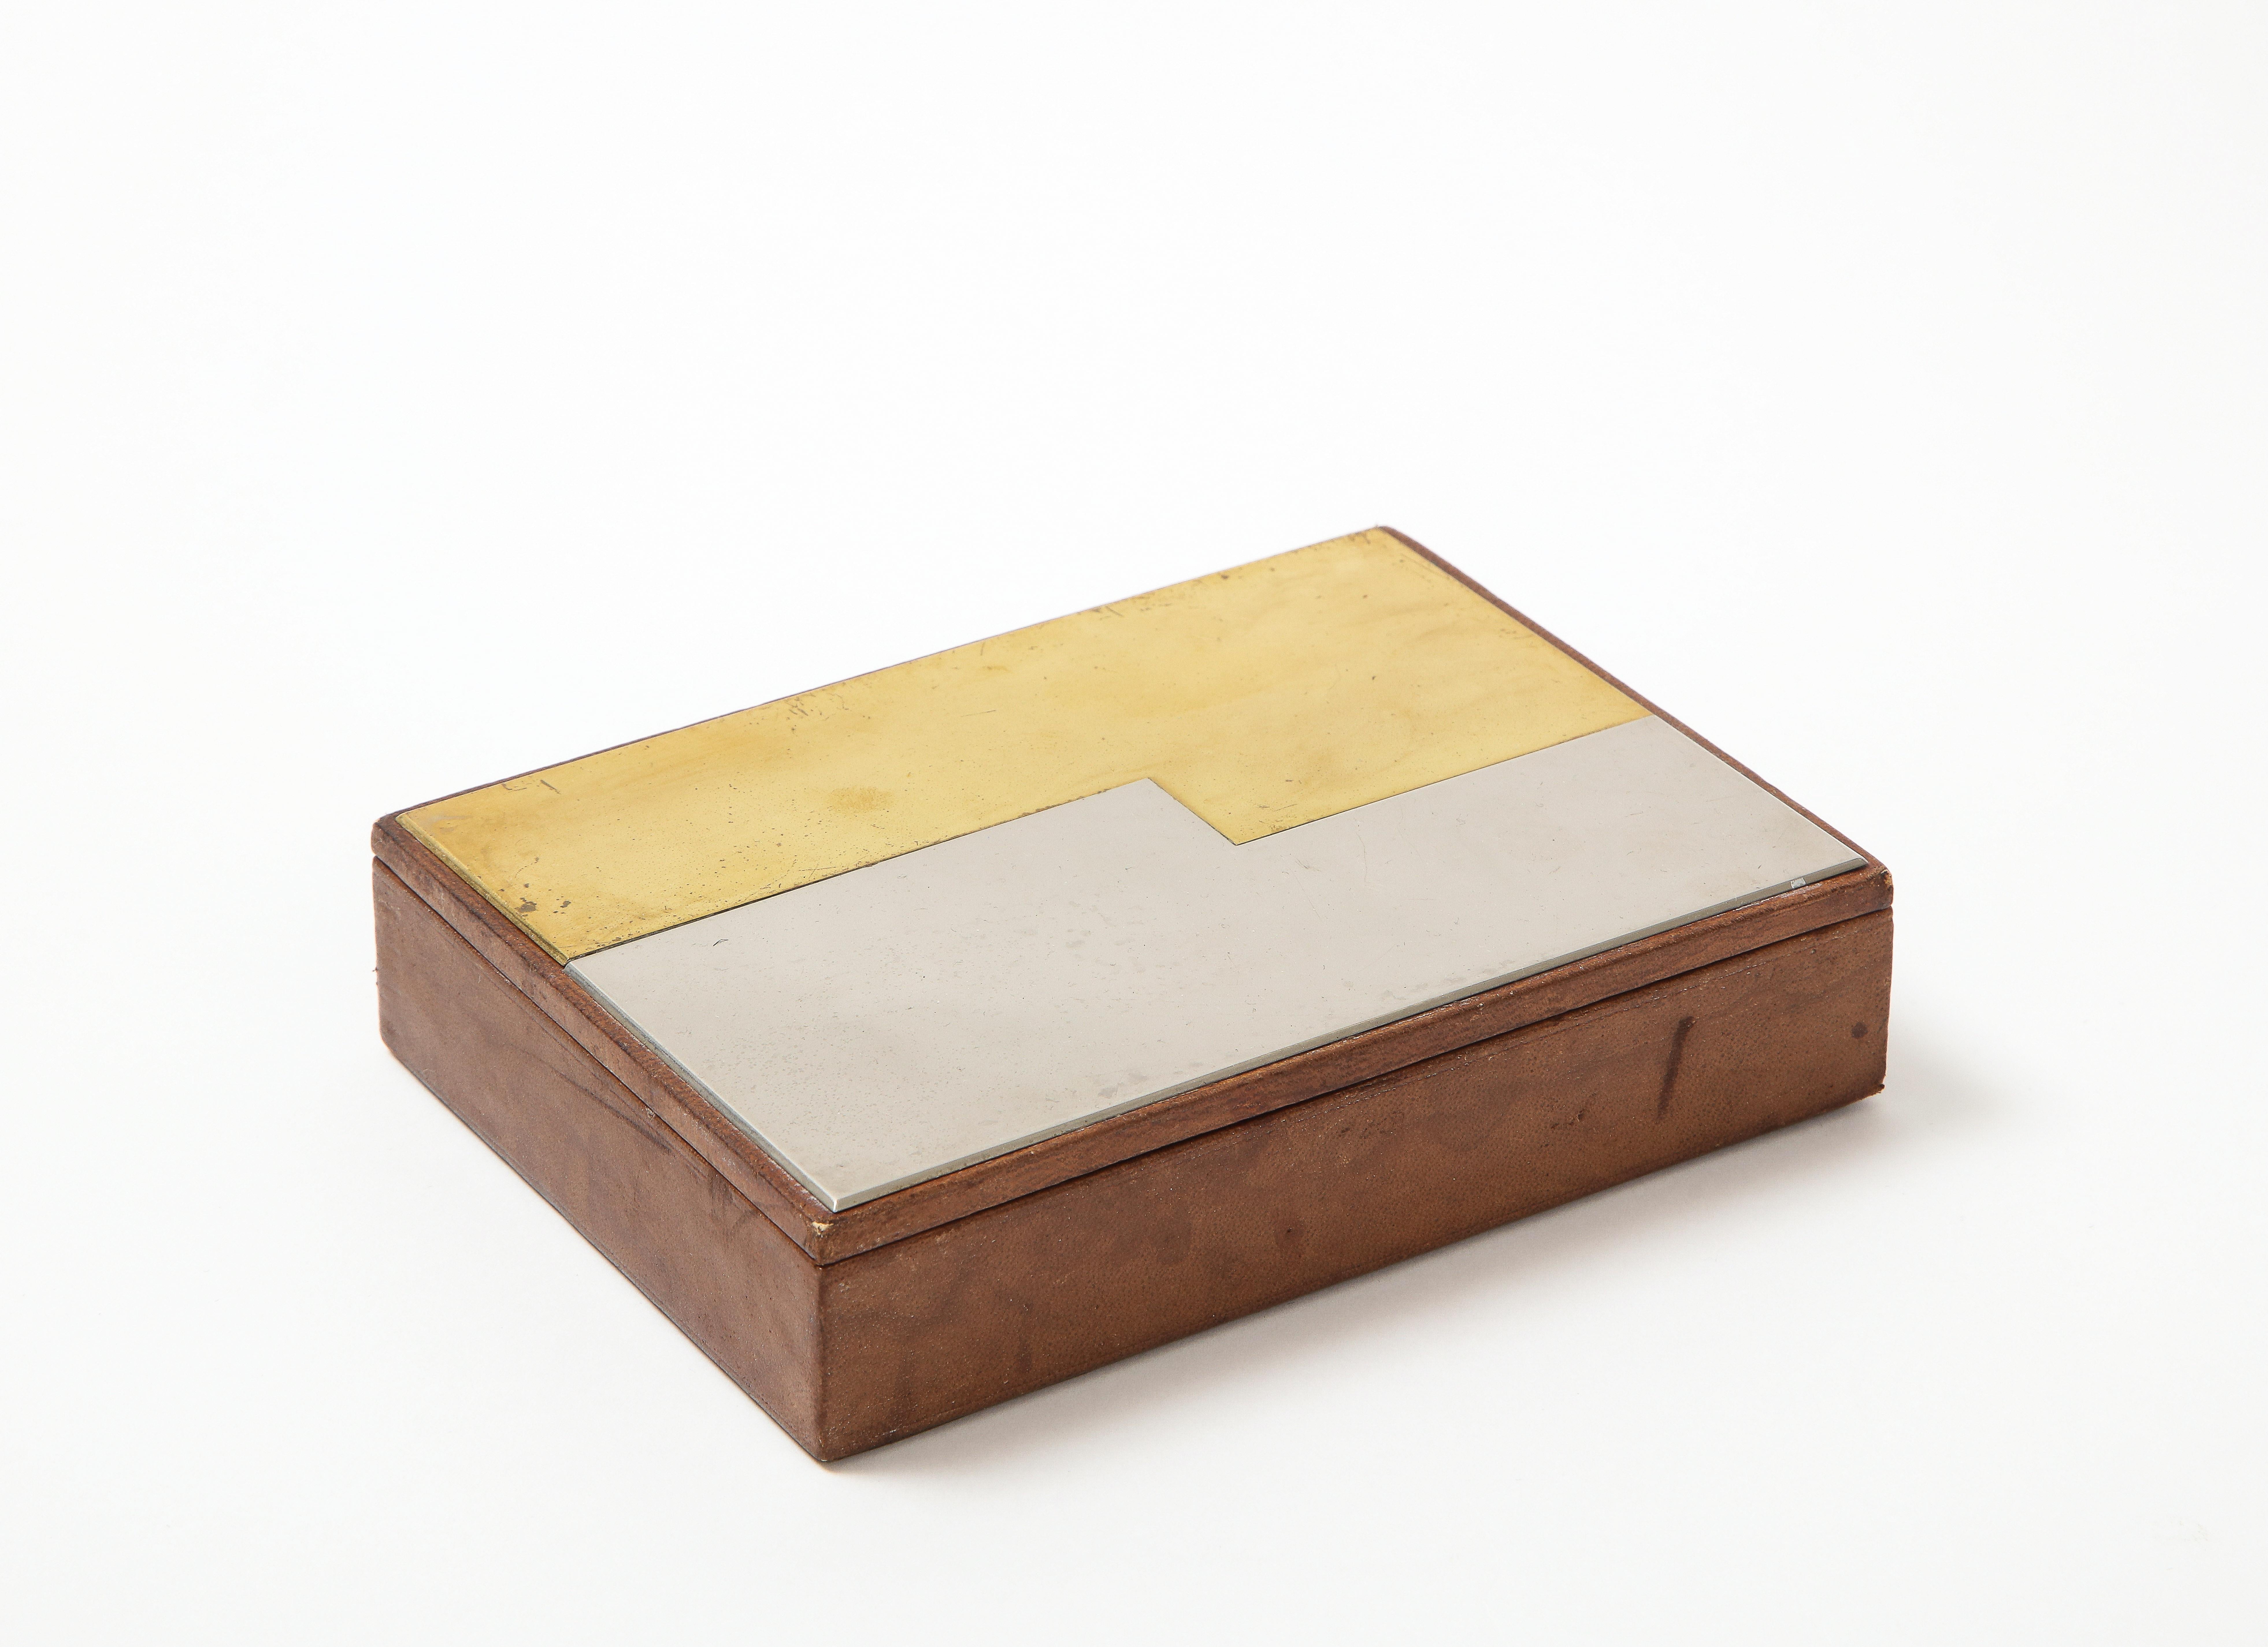 Elegant Brass Stainless Steel and Leather Box, France, 1970's For Sale